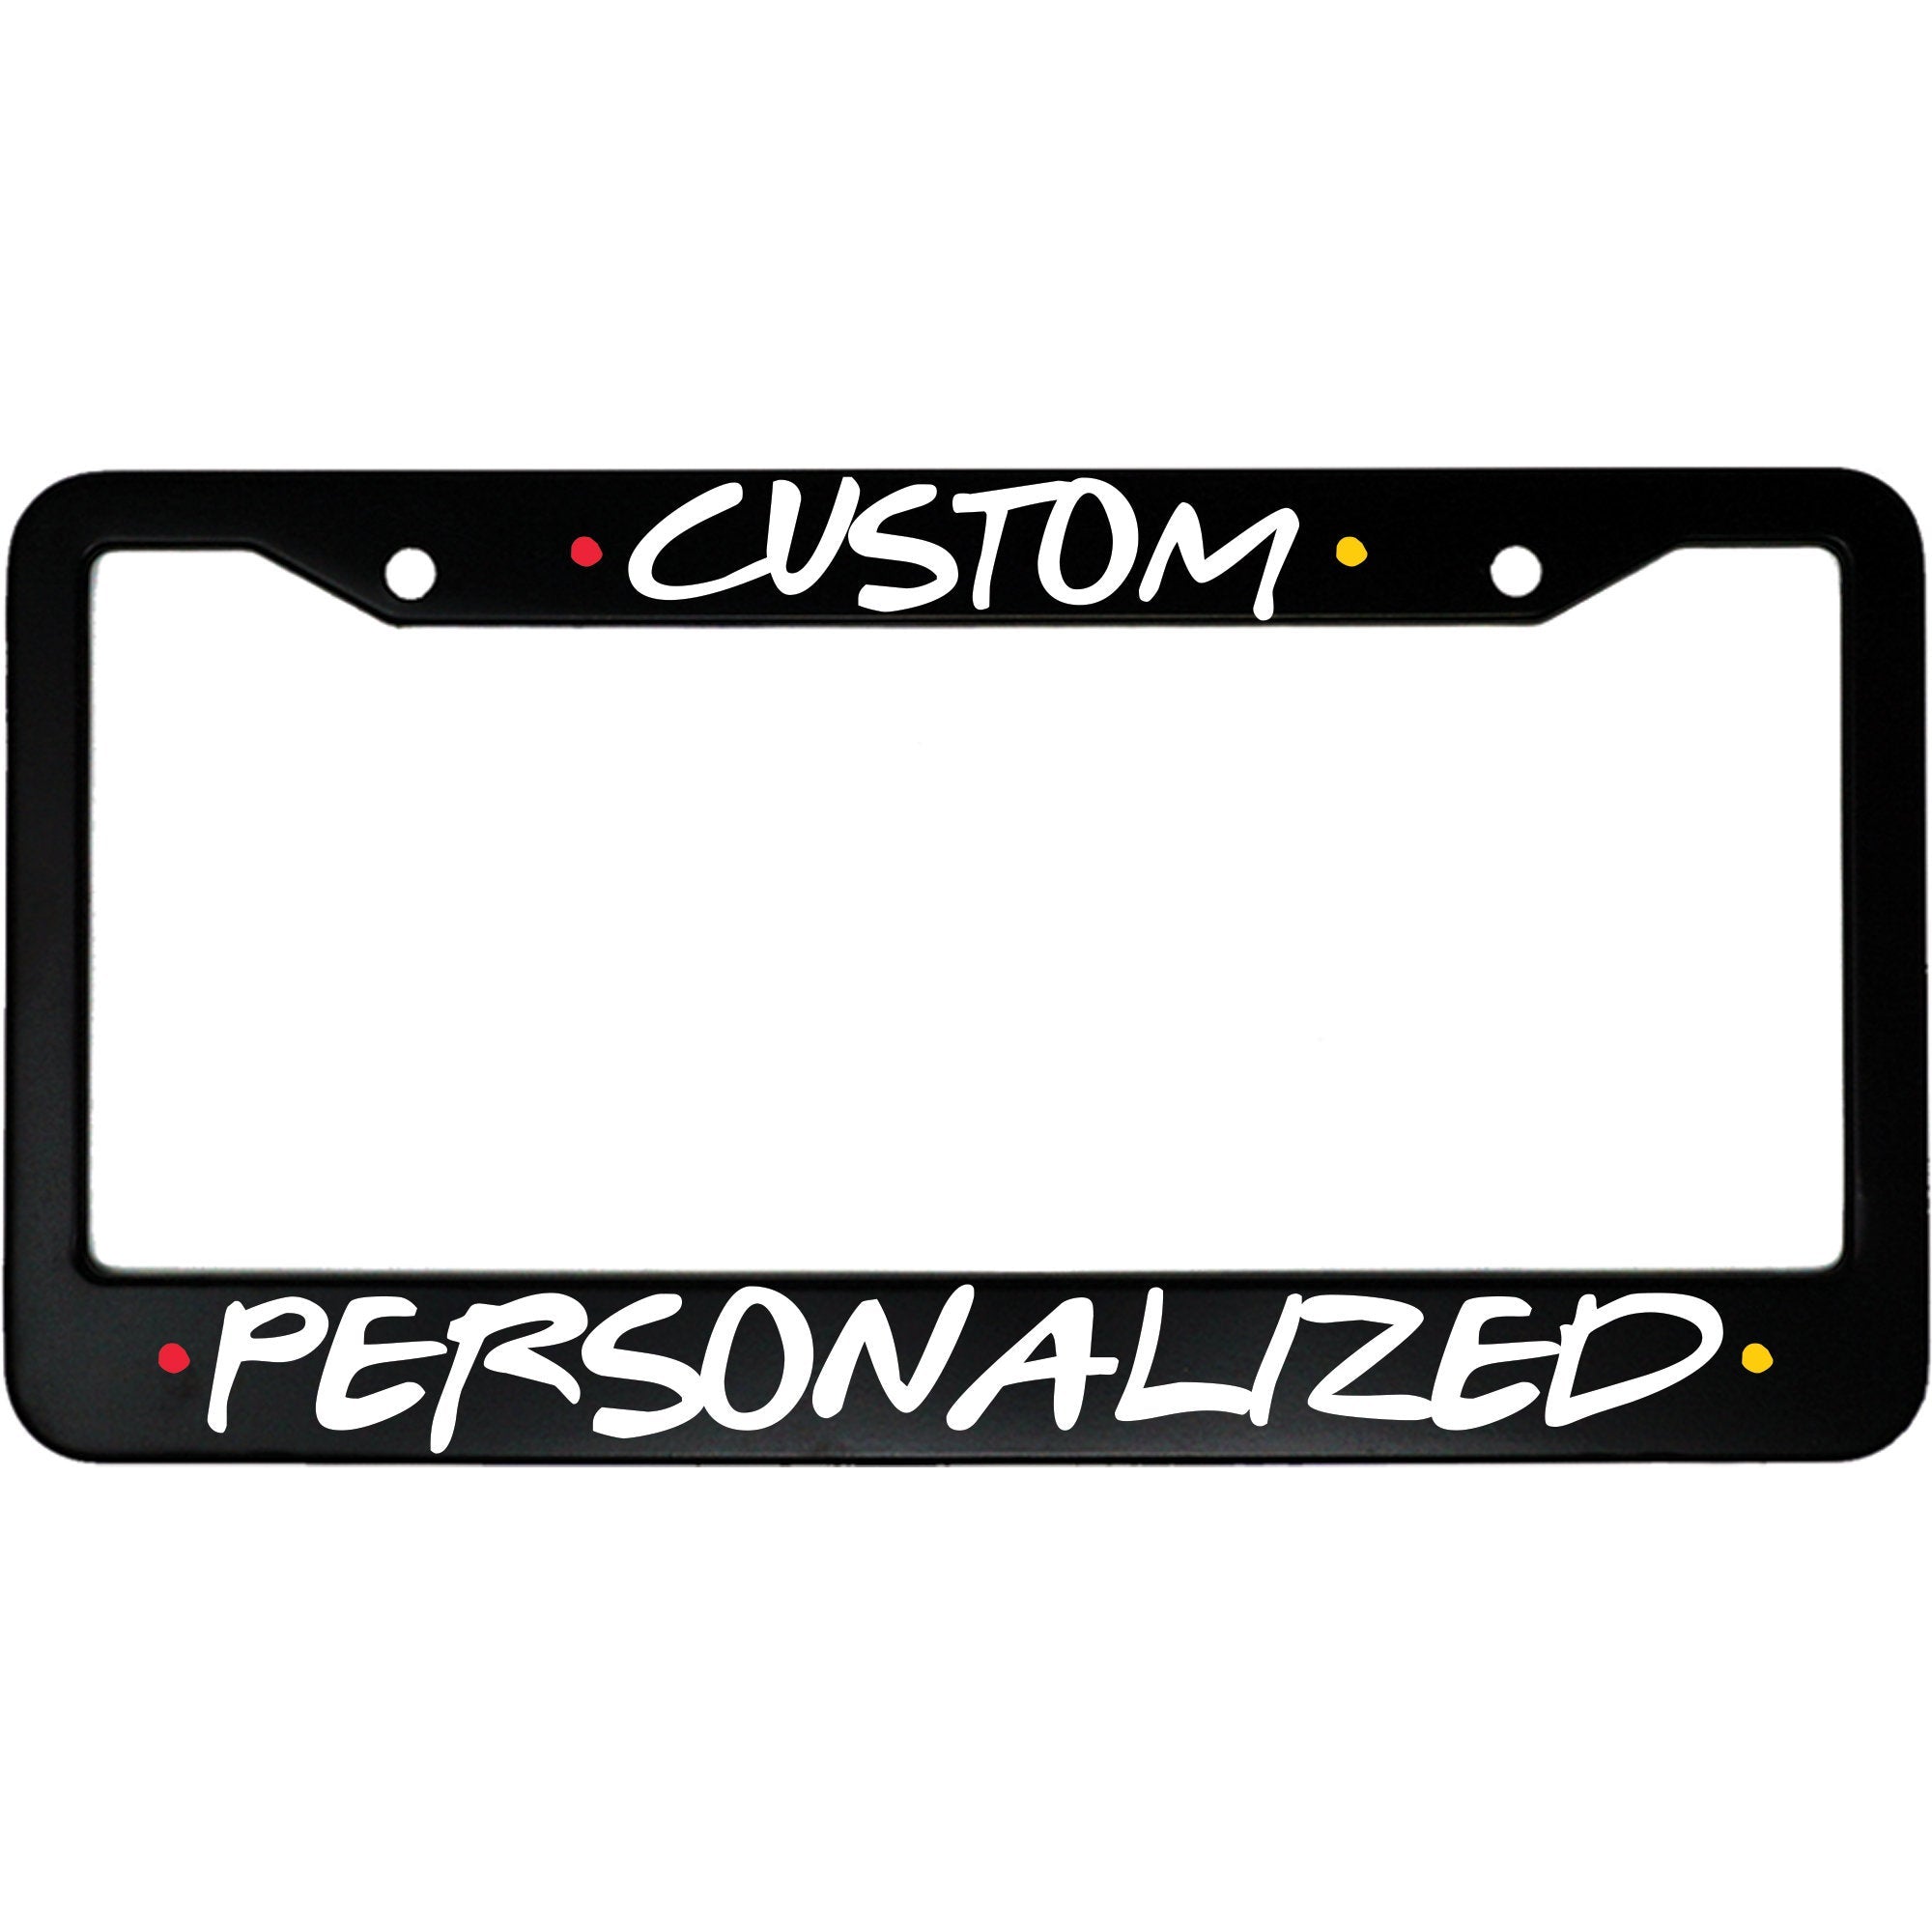 Personalized / Customized Friends TV Show Style Aluminum Car License Plate